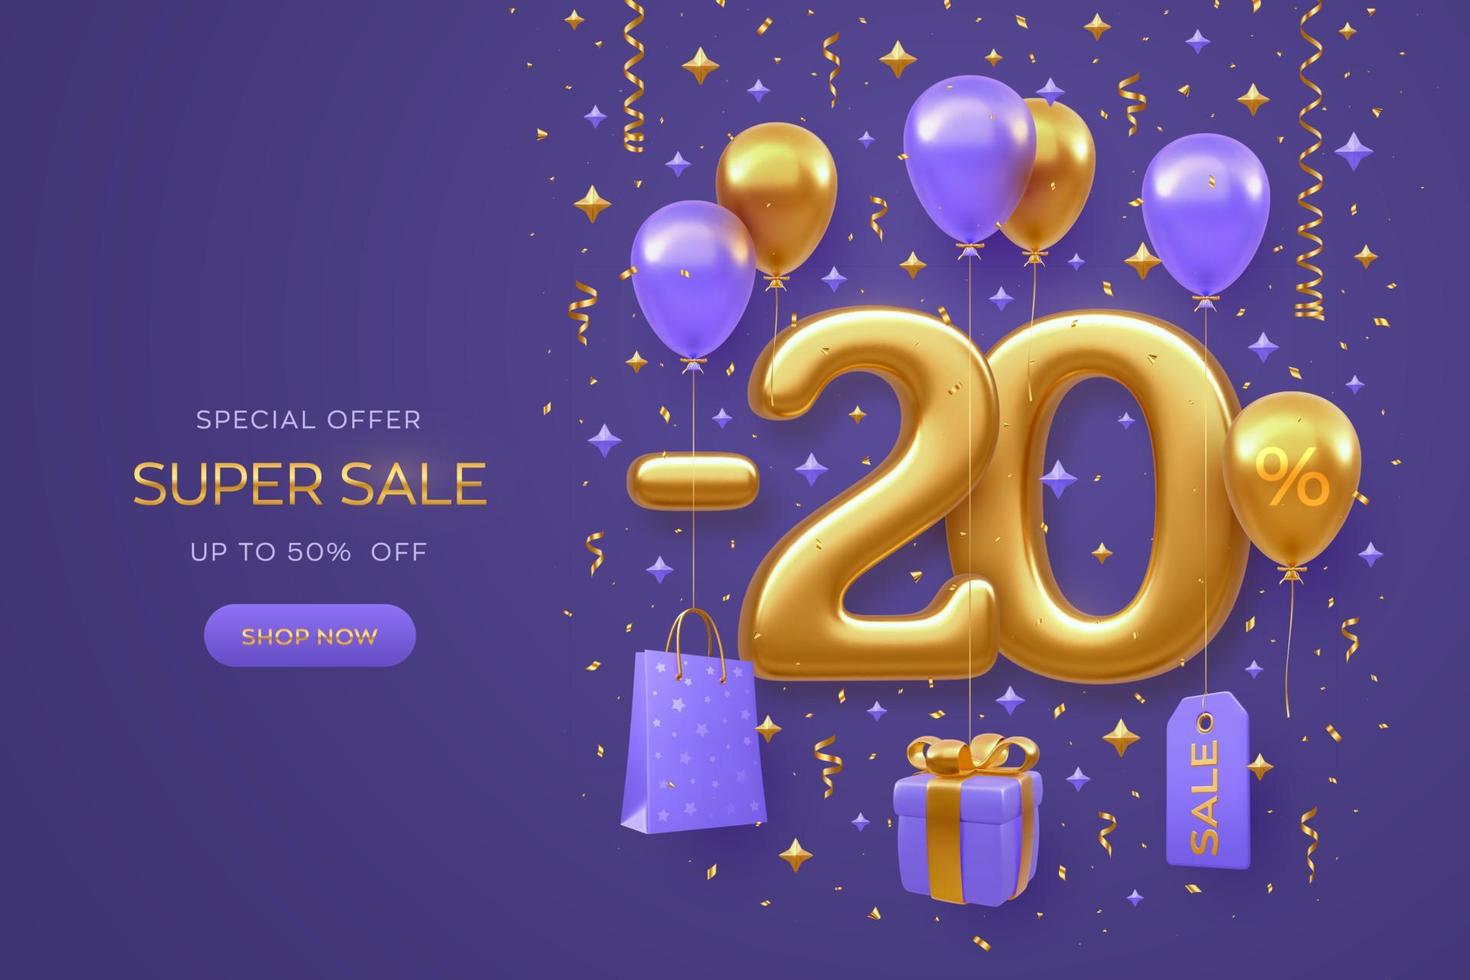 20 percent Off discount promotion Sale banner design on purple background. Realistic gold 3D 20 number with shopping bag, price tag, gift box with golden bow, fly helium balloons. Vector illustration.